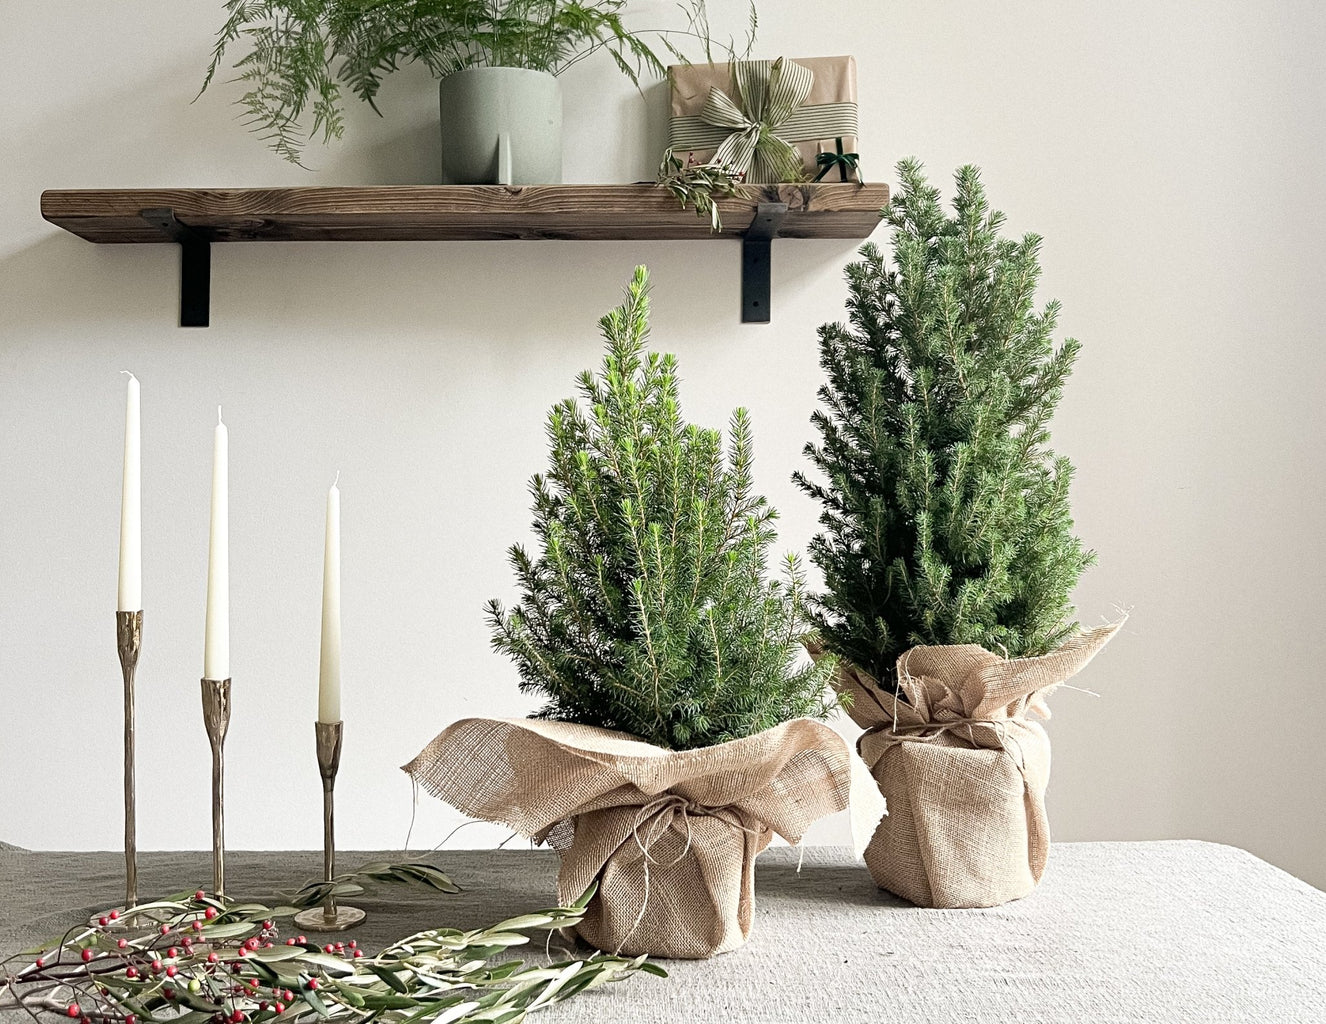 How to recycle your Christmas Tree - Leaf Envy